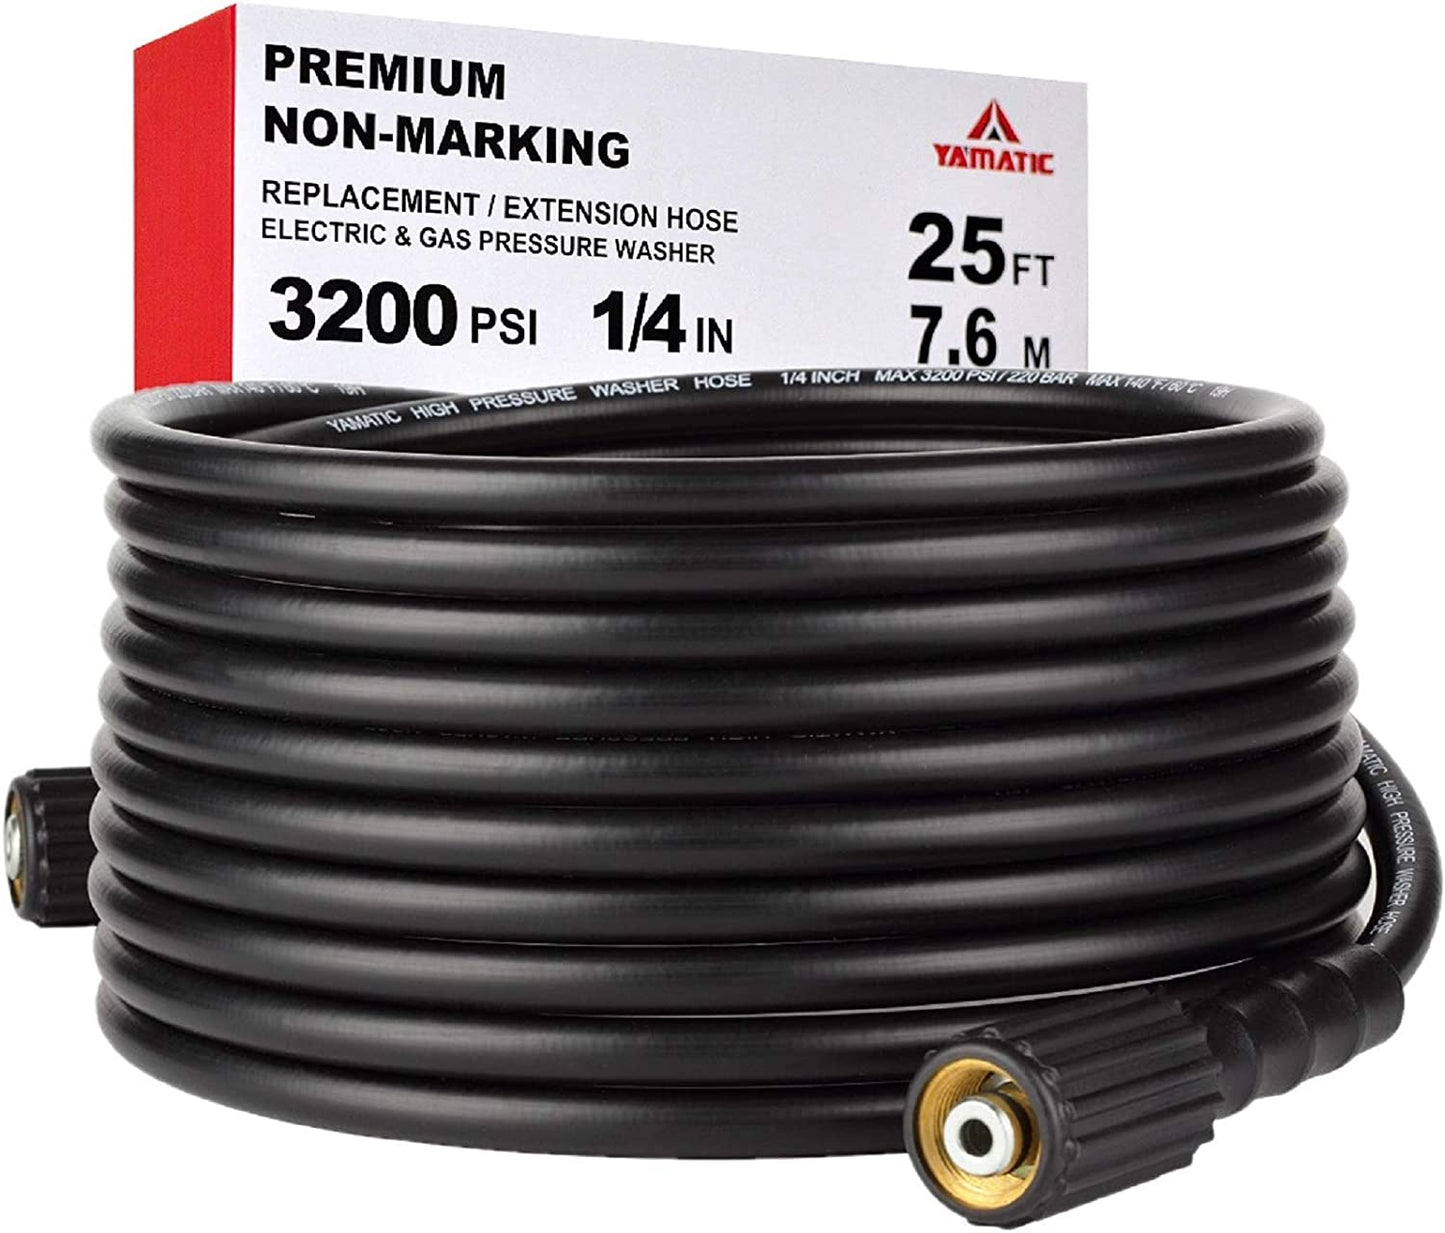 YAMATIC W Pressure Washer Hose 25 FT 1/4" Kink Free M22-14mm Brass Thread Replacement For Most Brand Pressure Washers, 3200 PSI..